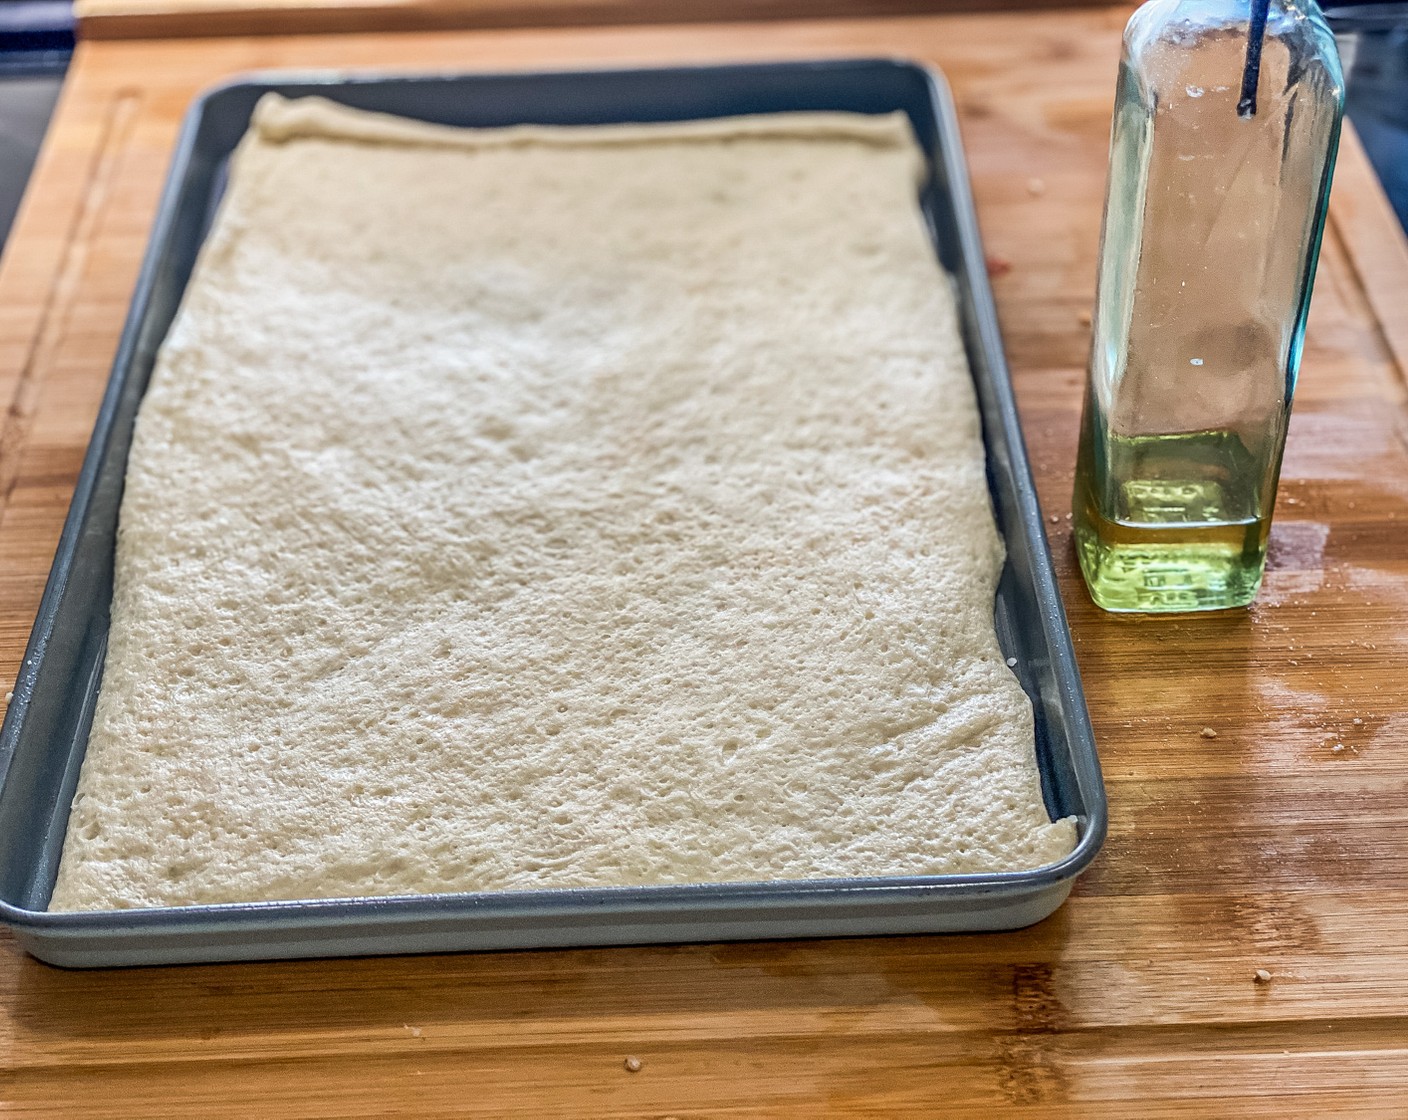 step 1 Preheat the oven to 400 degrees F (205 degrees C). Spray the baking sheet with Non-Stick Baking Spray (as needed). Add Prepared Pizza Crust (1 can) and shape to fit the baking sheet.